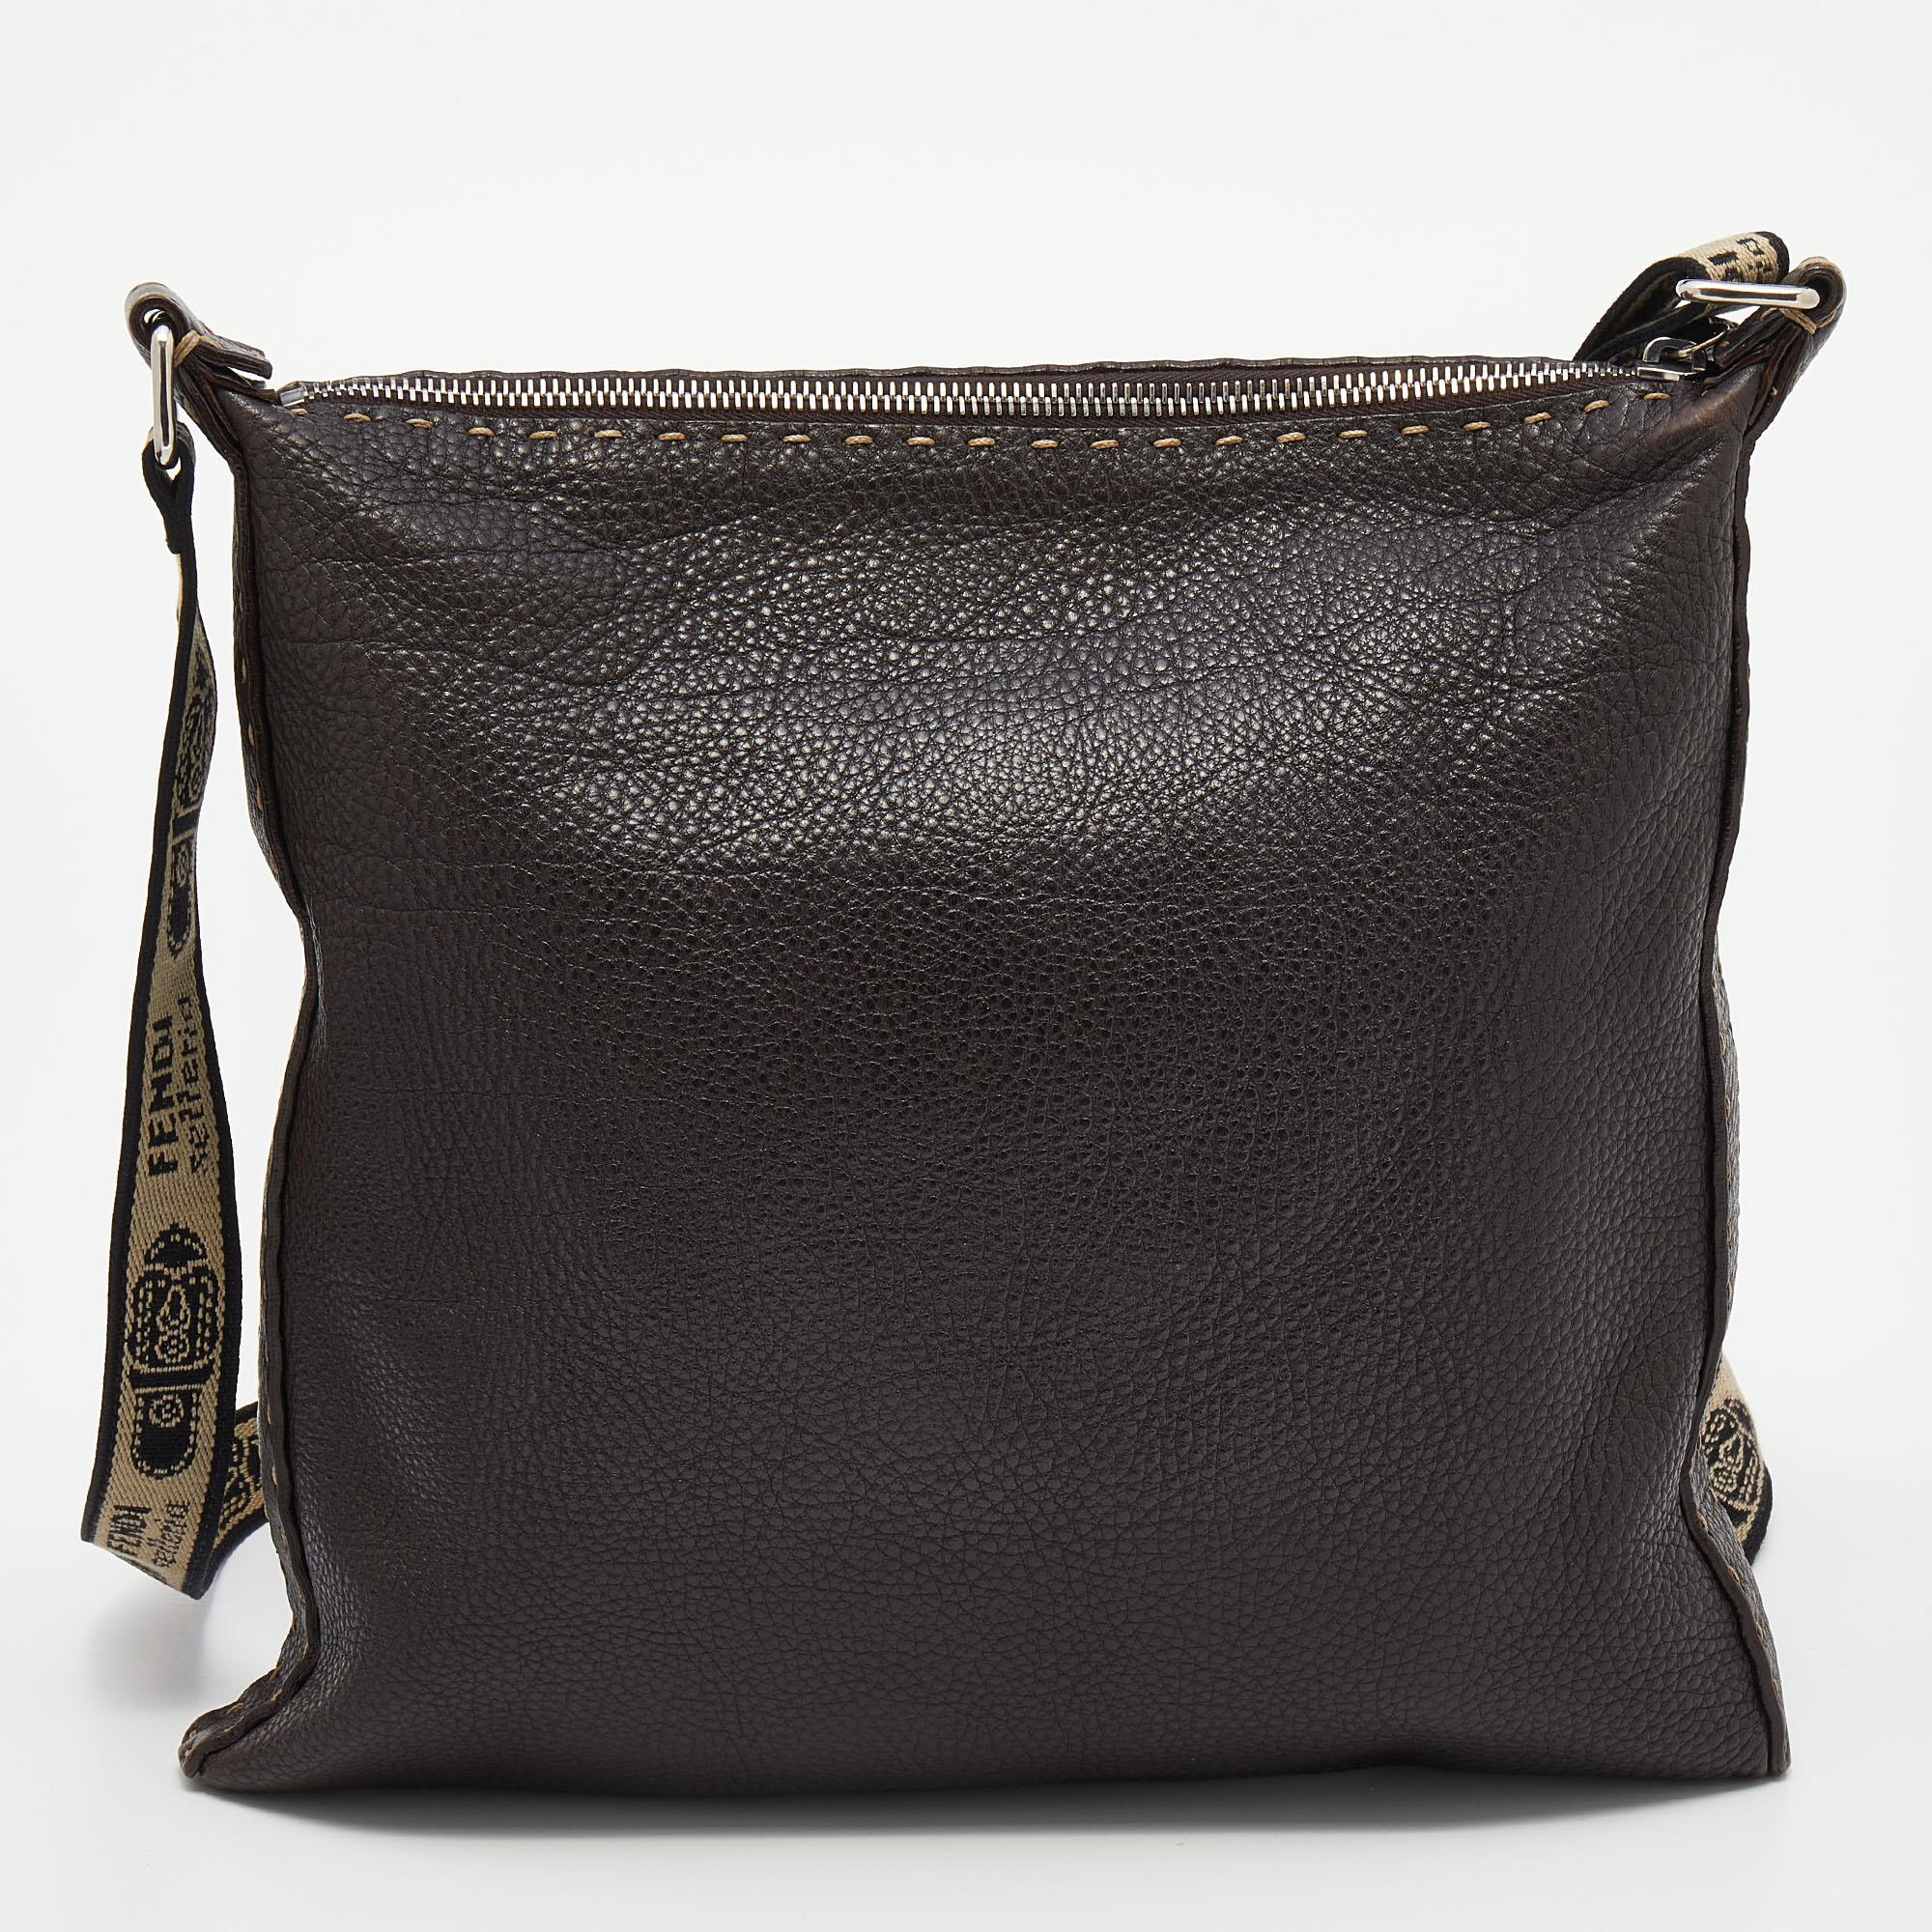 Made from leather, this Fendi messenger bag is as stylish as practical. It features silver-tone hardware, a brand signature on the front shoulder strap, and a shoulder strap. Lined with fabric, its spacious interior can comfortably carry your daily